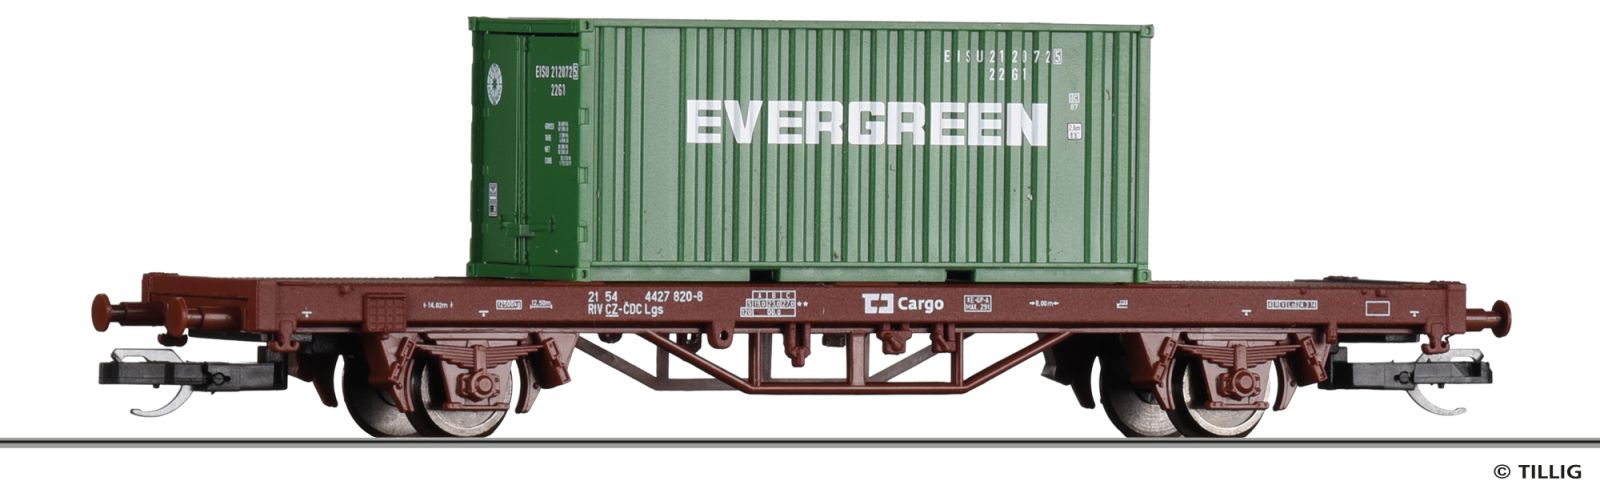 START-Container car CD